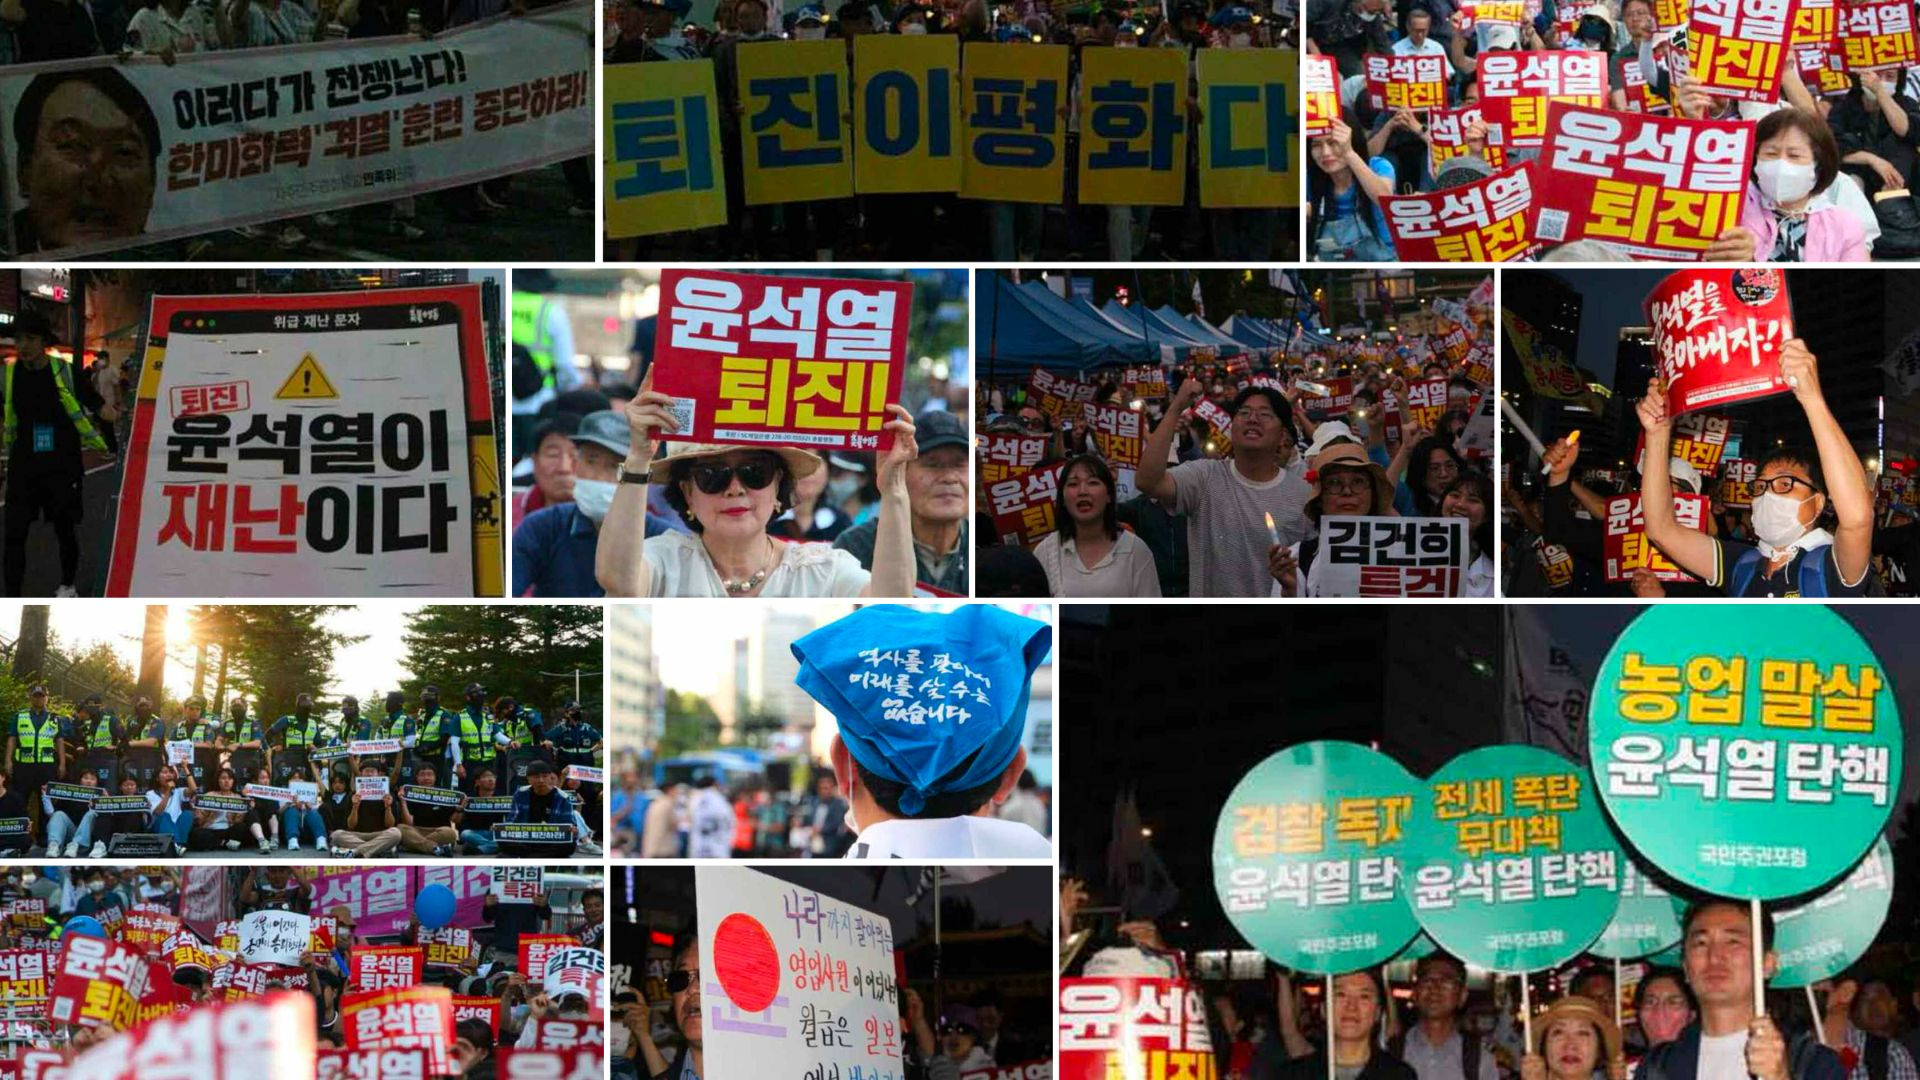 North Korean propagandists amplify anti-Yoon protests in South